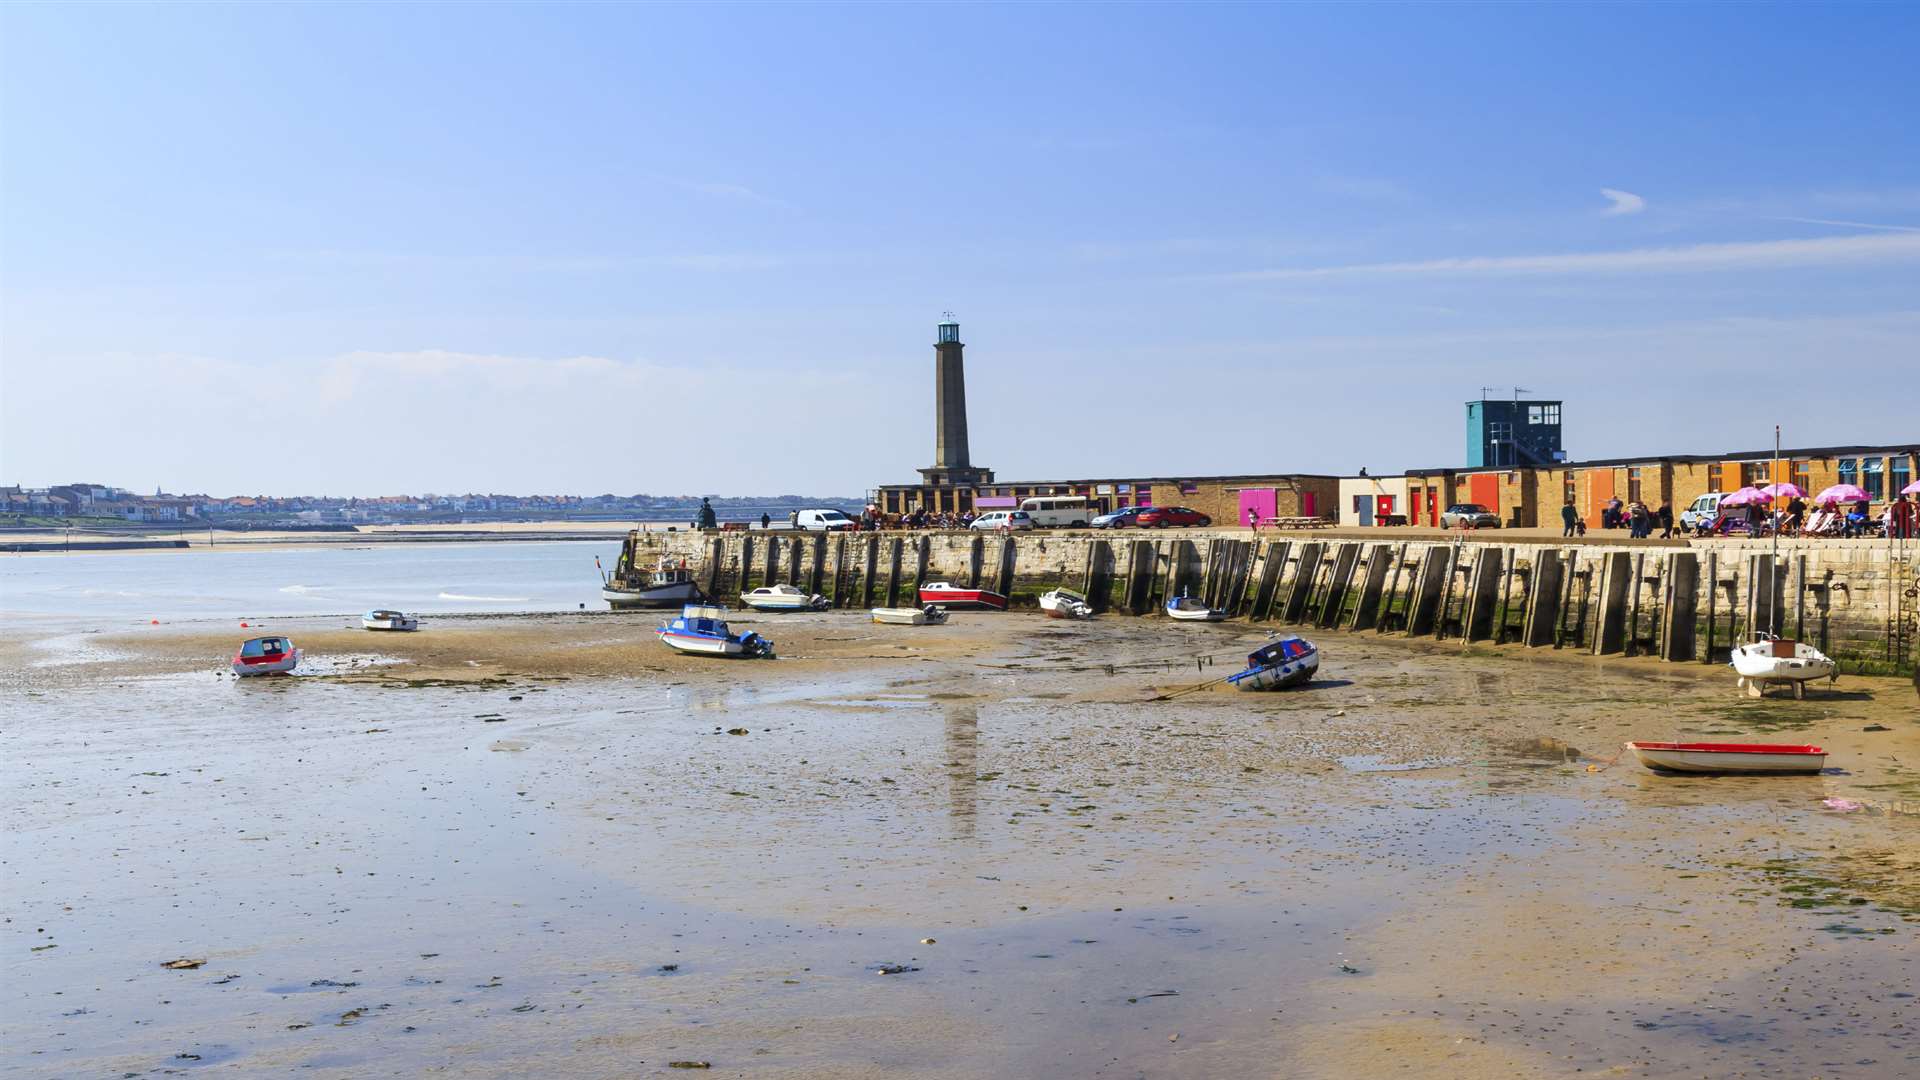 A man was rescued from the sea in Margate